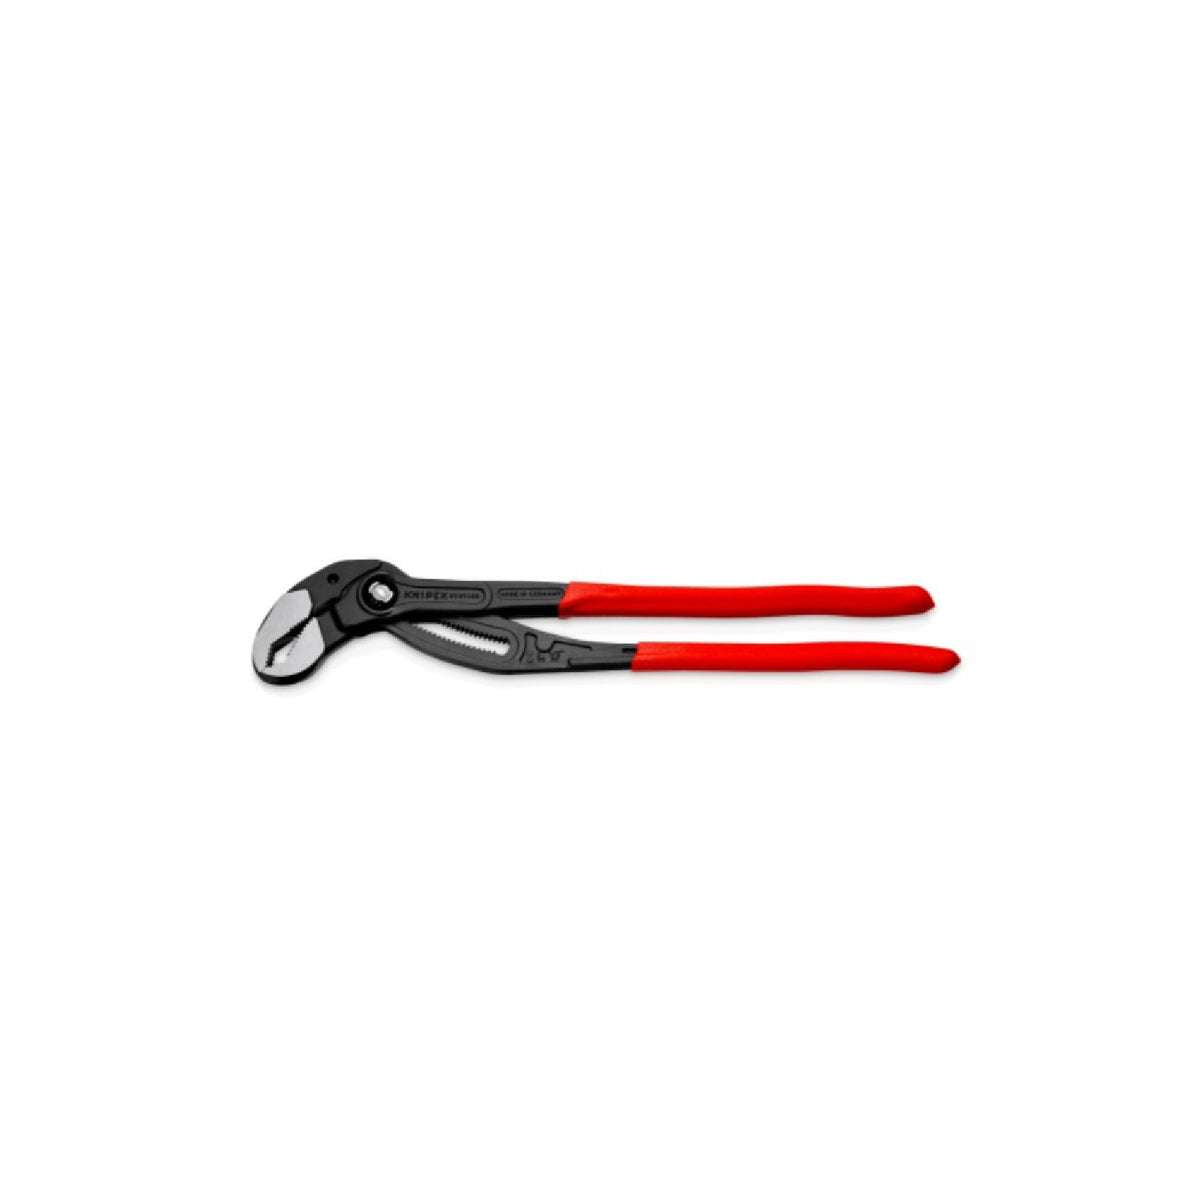 Cobra XL, Adjustable Pliers for Pipes and Nuts 400mm - Knipex 87 01 400